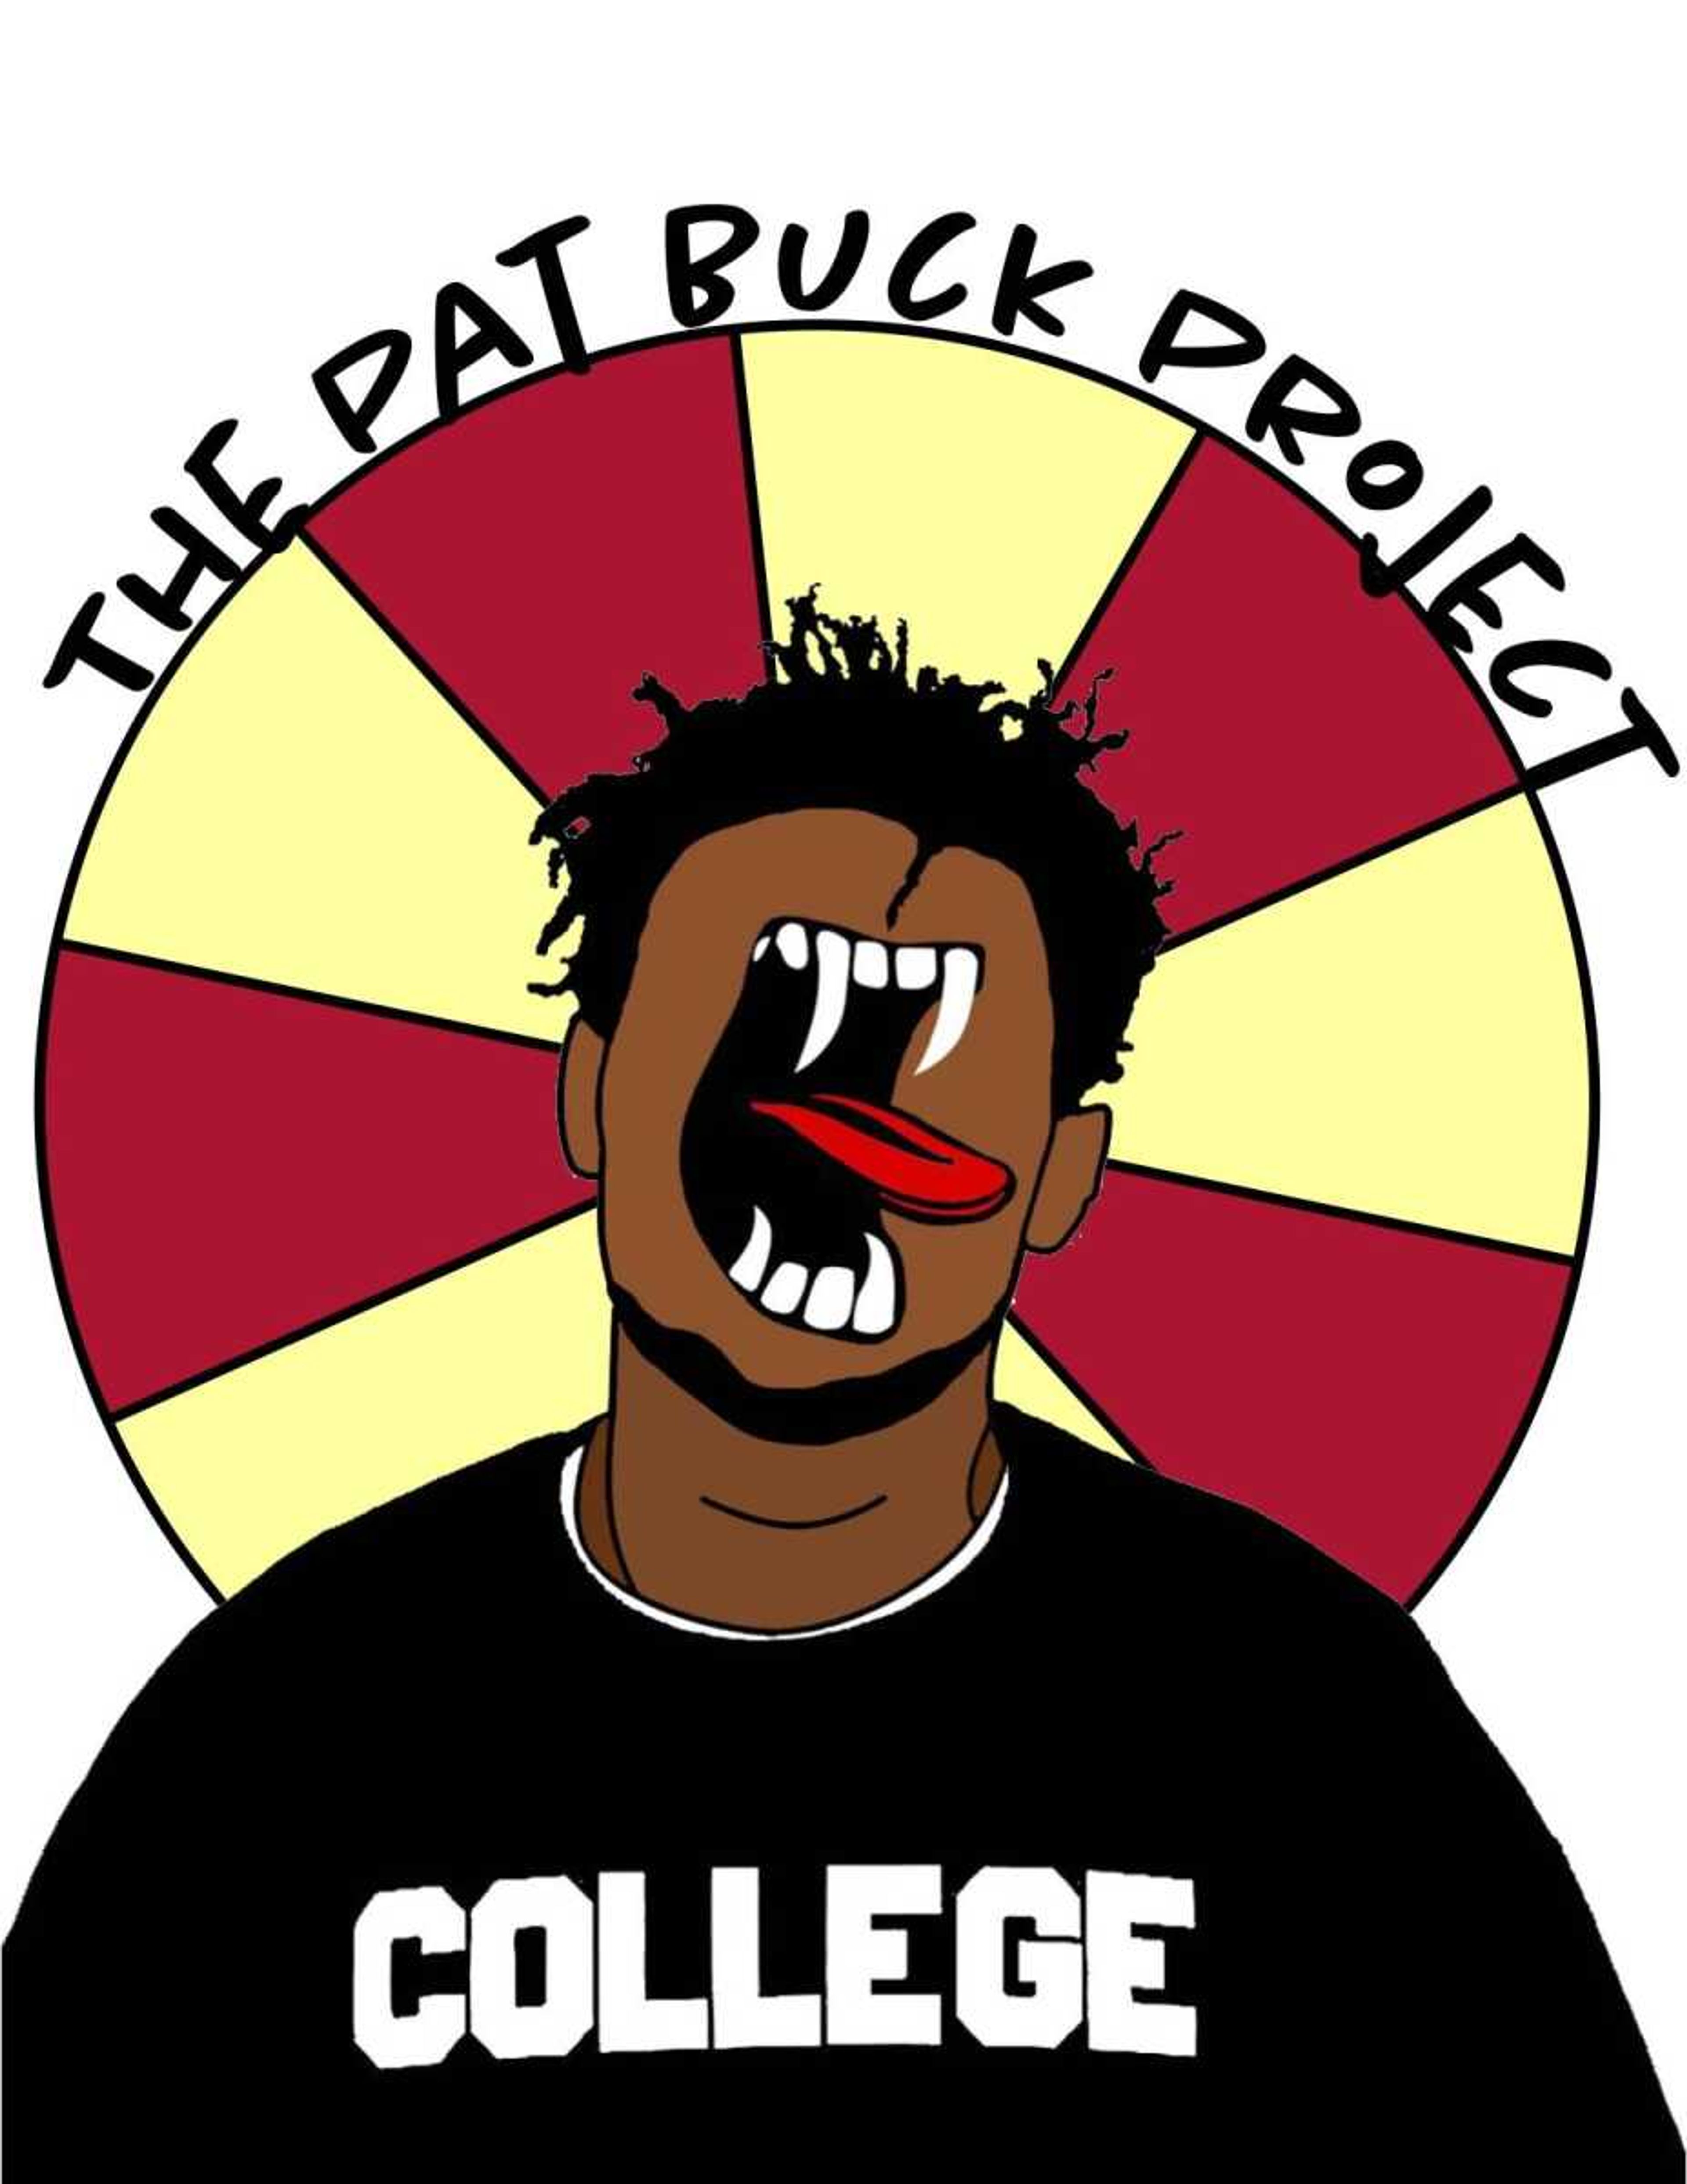 The Pat Buck Project: Impact of the Ear - Hustler